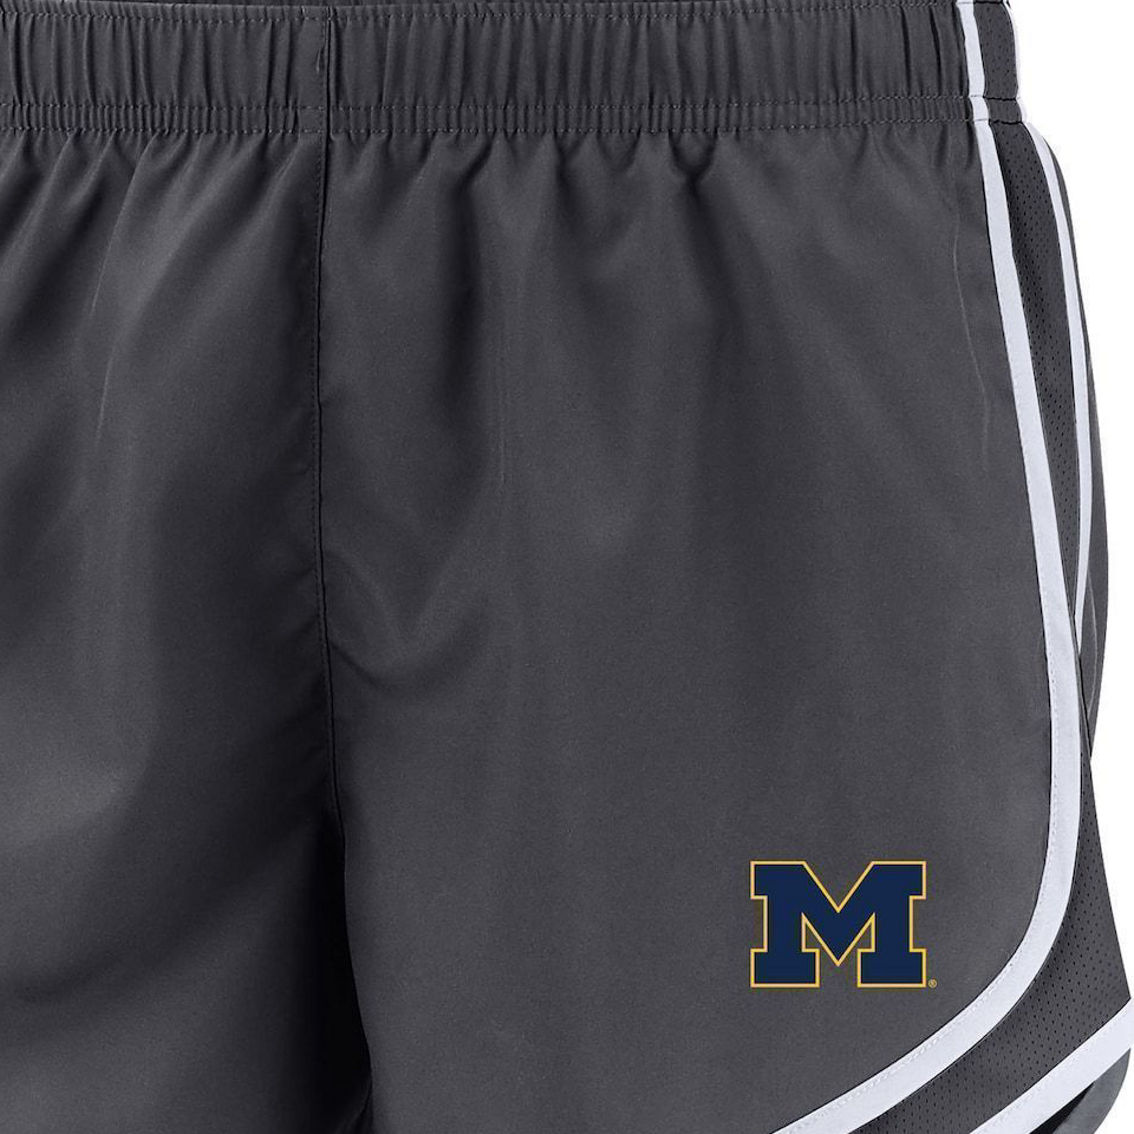 Nike Women's Anthracite Michigan Wolverines Team Tempo Performance Shorts - Image 3 of 4